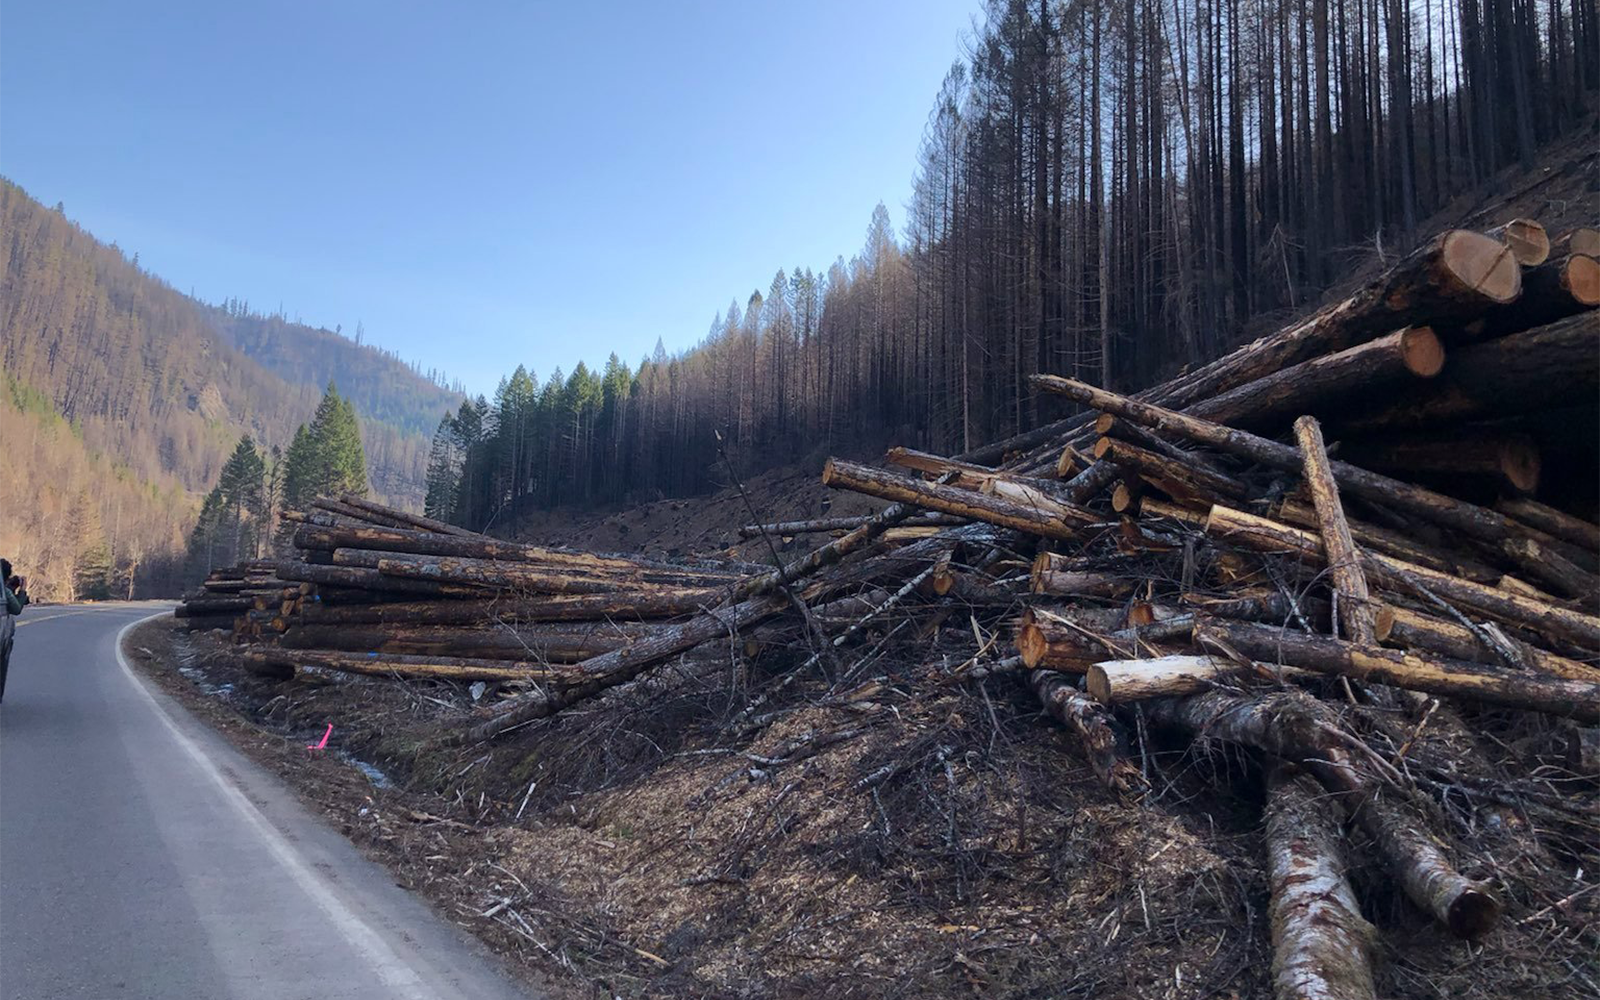 Arborists say ODOT post-fires tree cutting is excessive, rushed